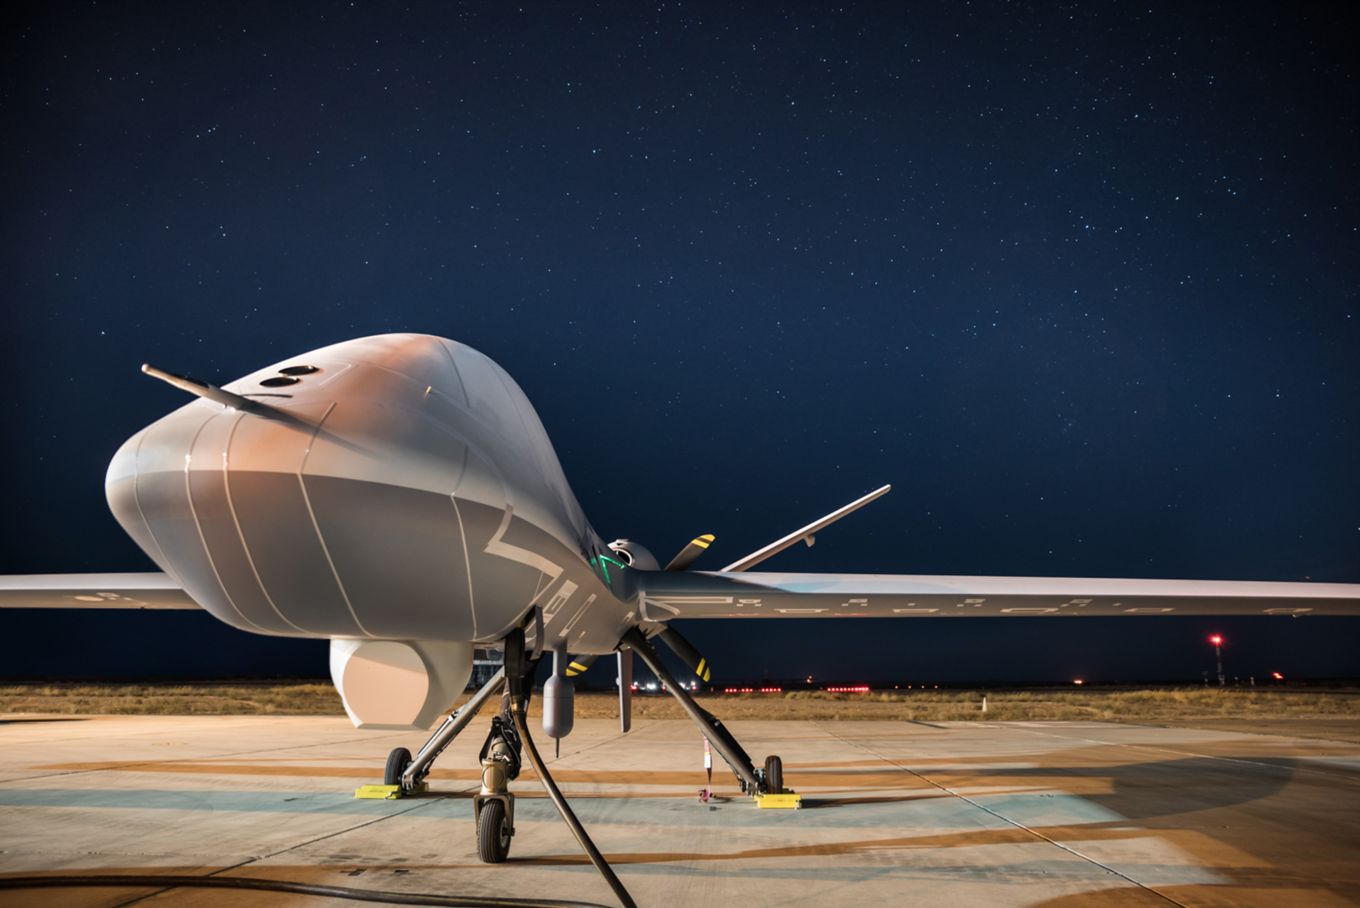 The UK received the first Protector RG Mk1 drone